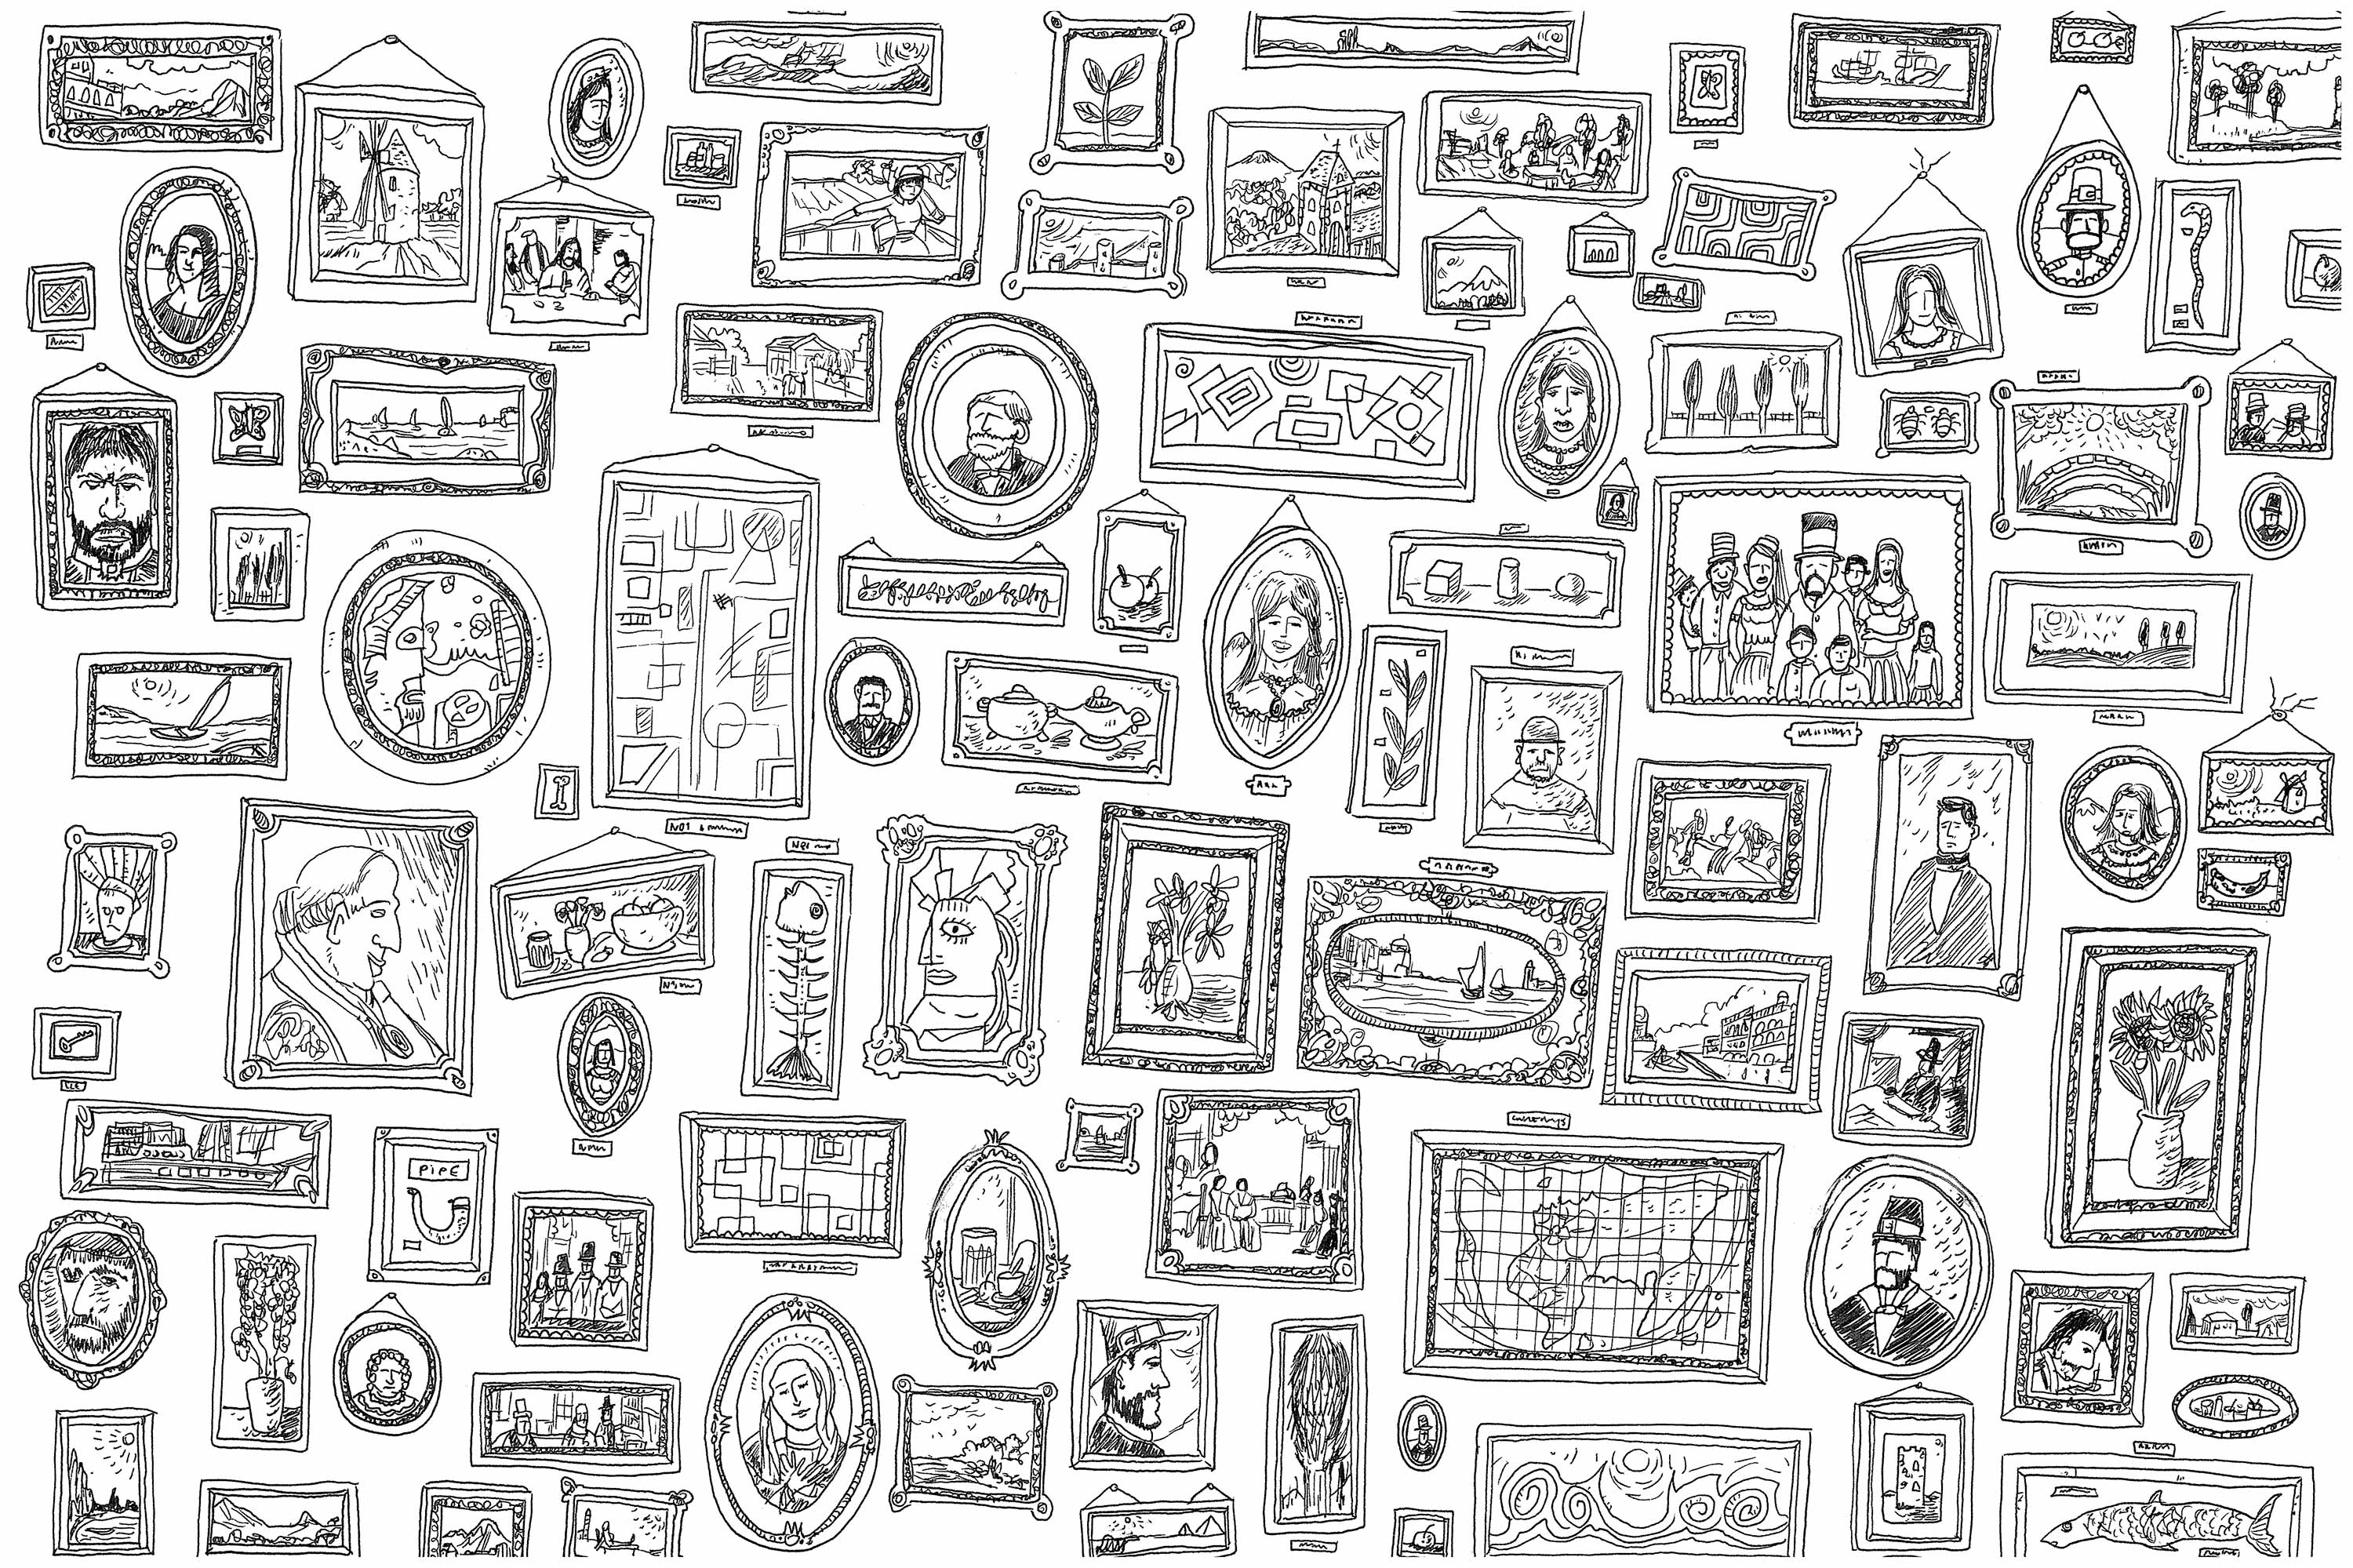 'Portraits', a complex coloring page, 'Where is Waldo ?' style, Artist : Frédéric Brogard